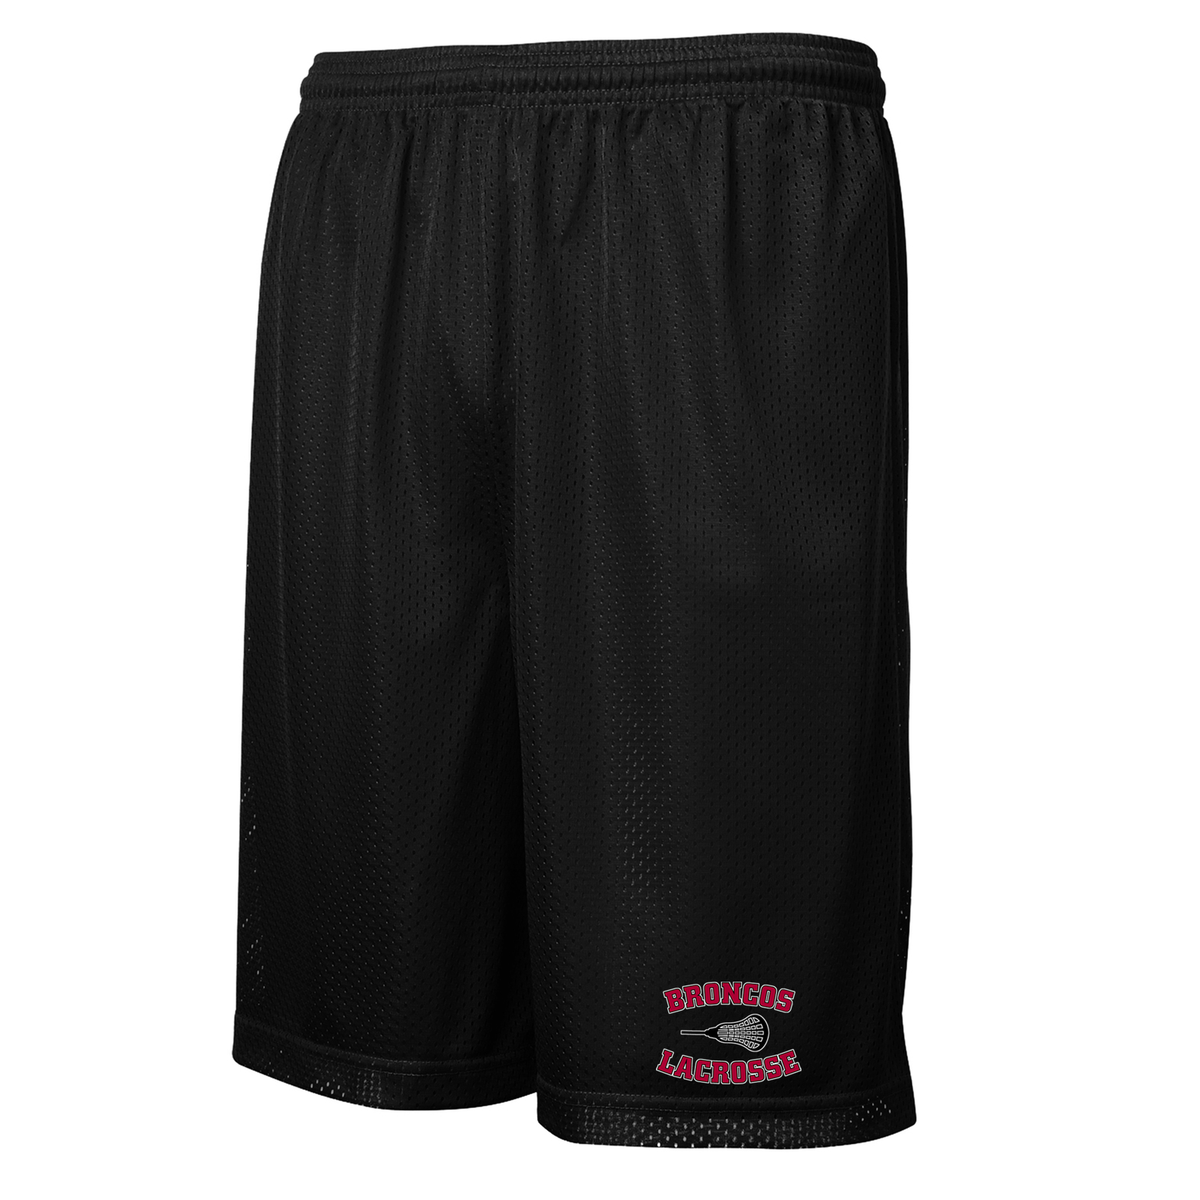 Bailey Middle School Lacrosse Classic Mesh Shorts